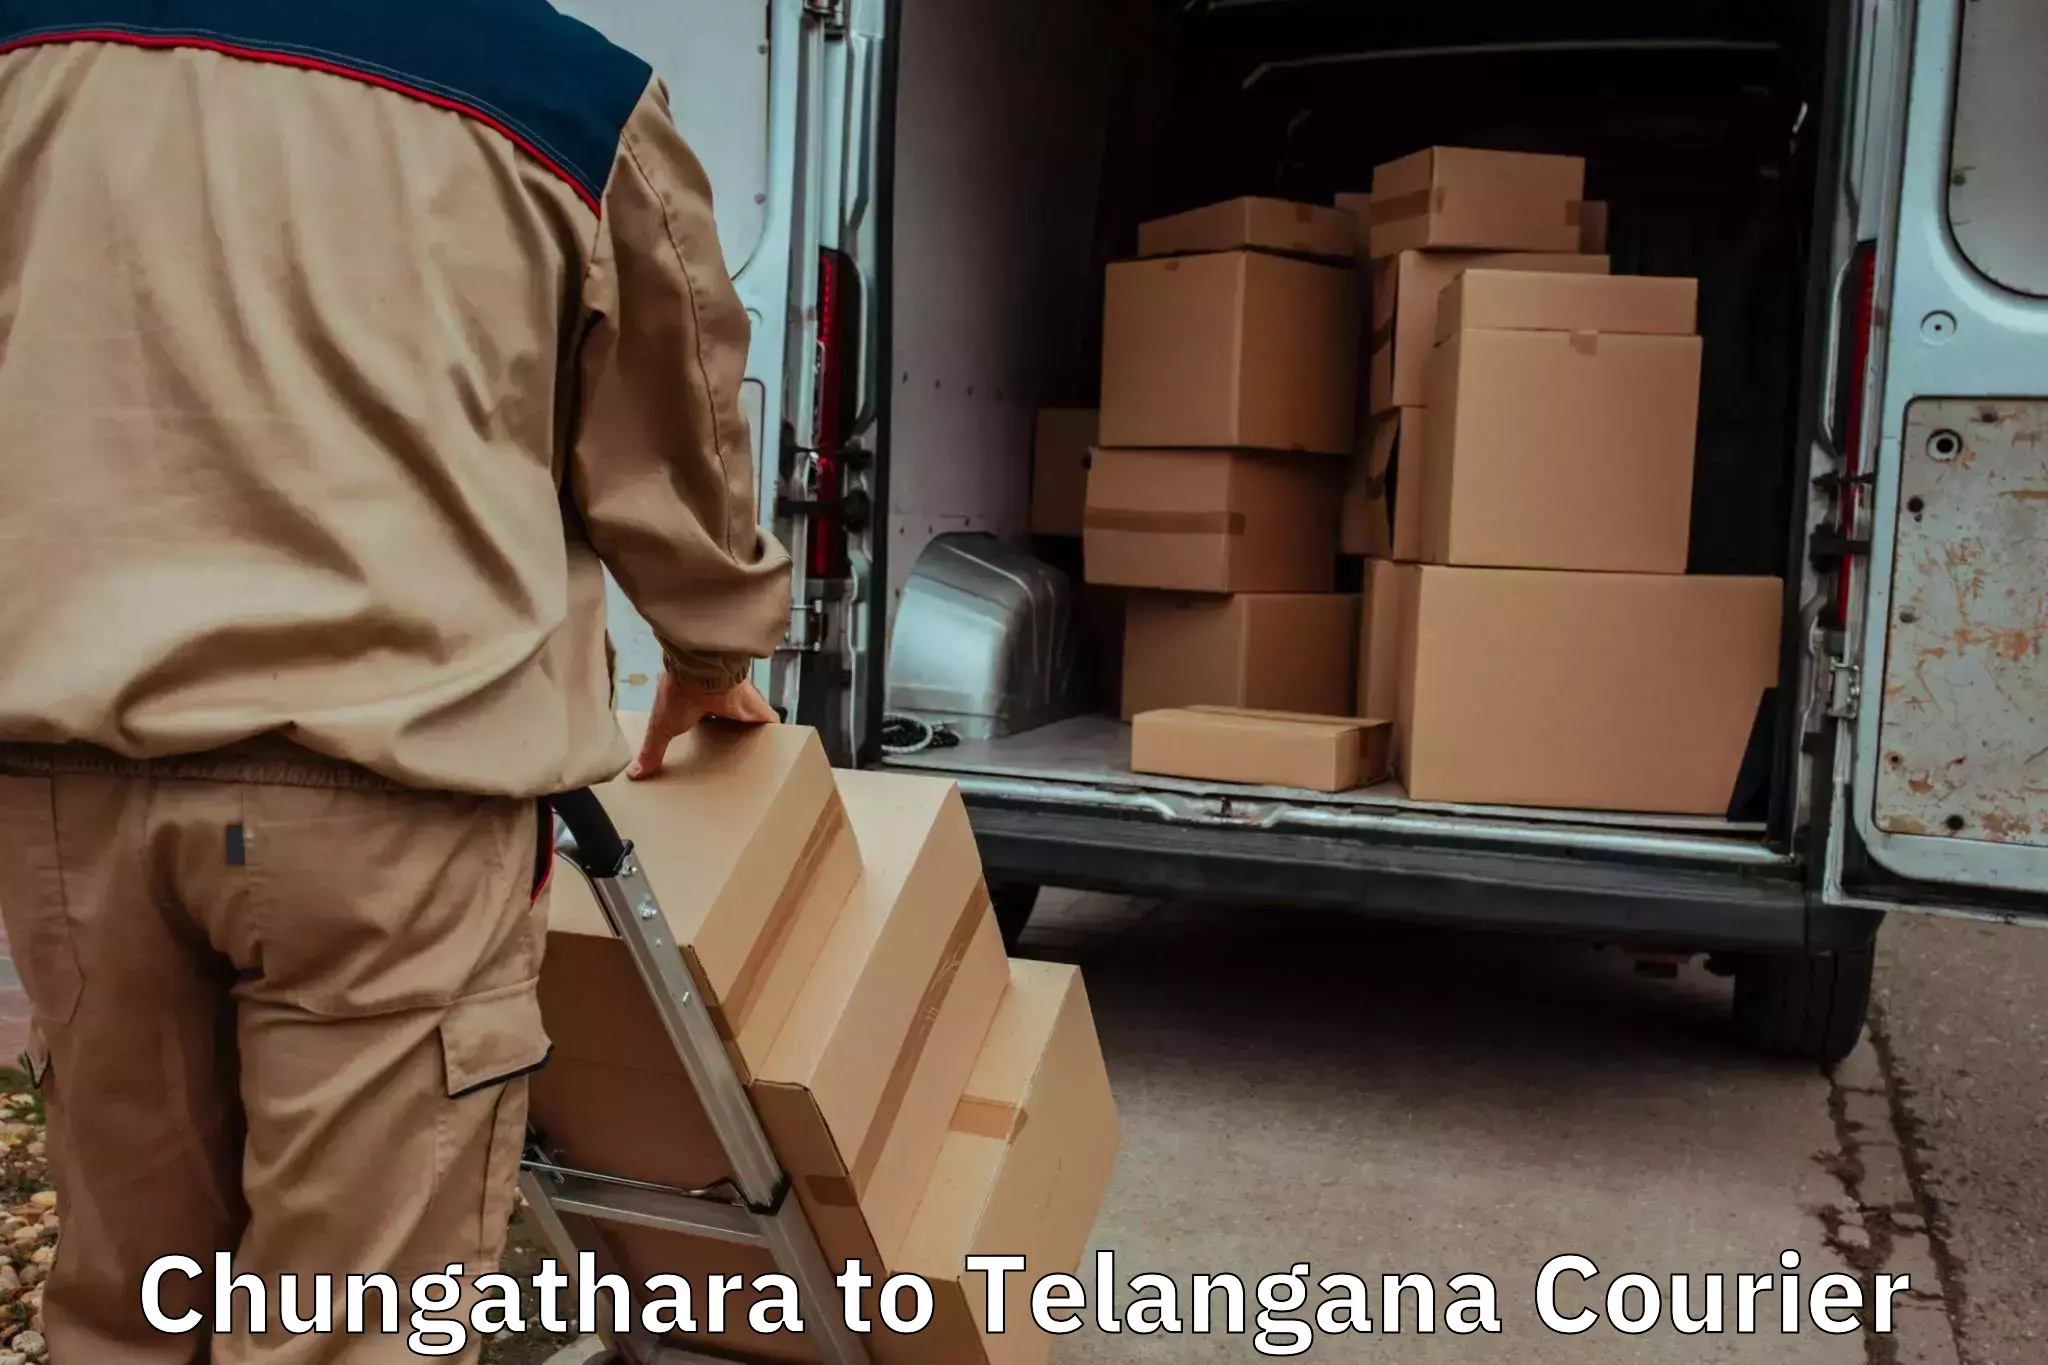 Reliable moving assistance Chungathara to Chevella